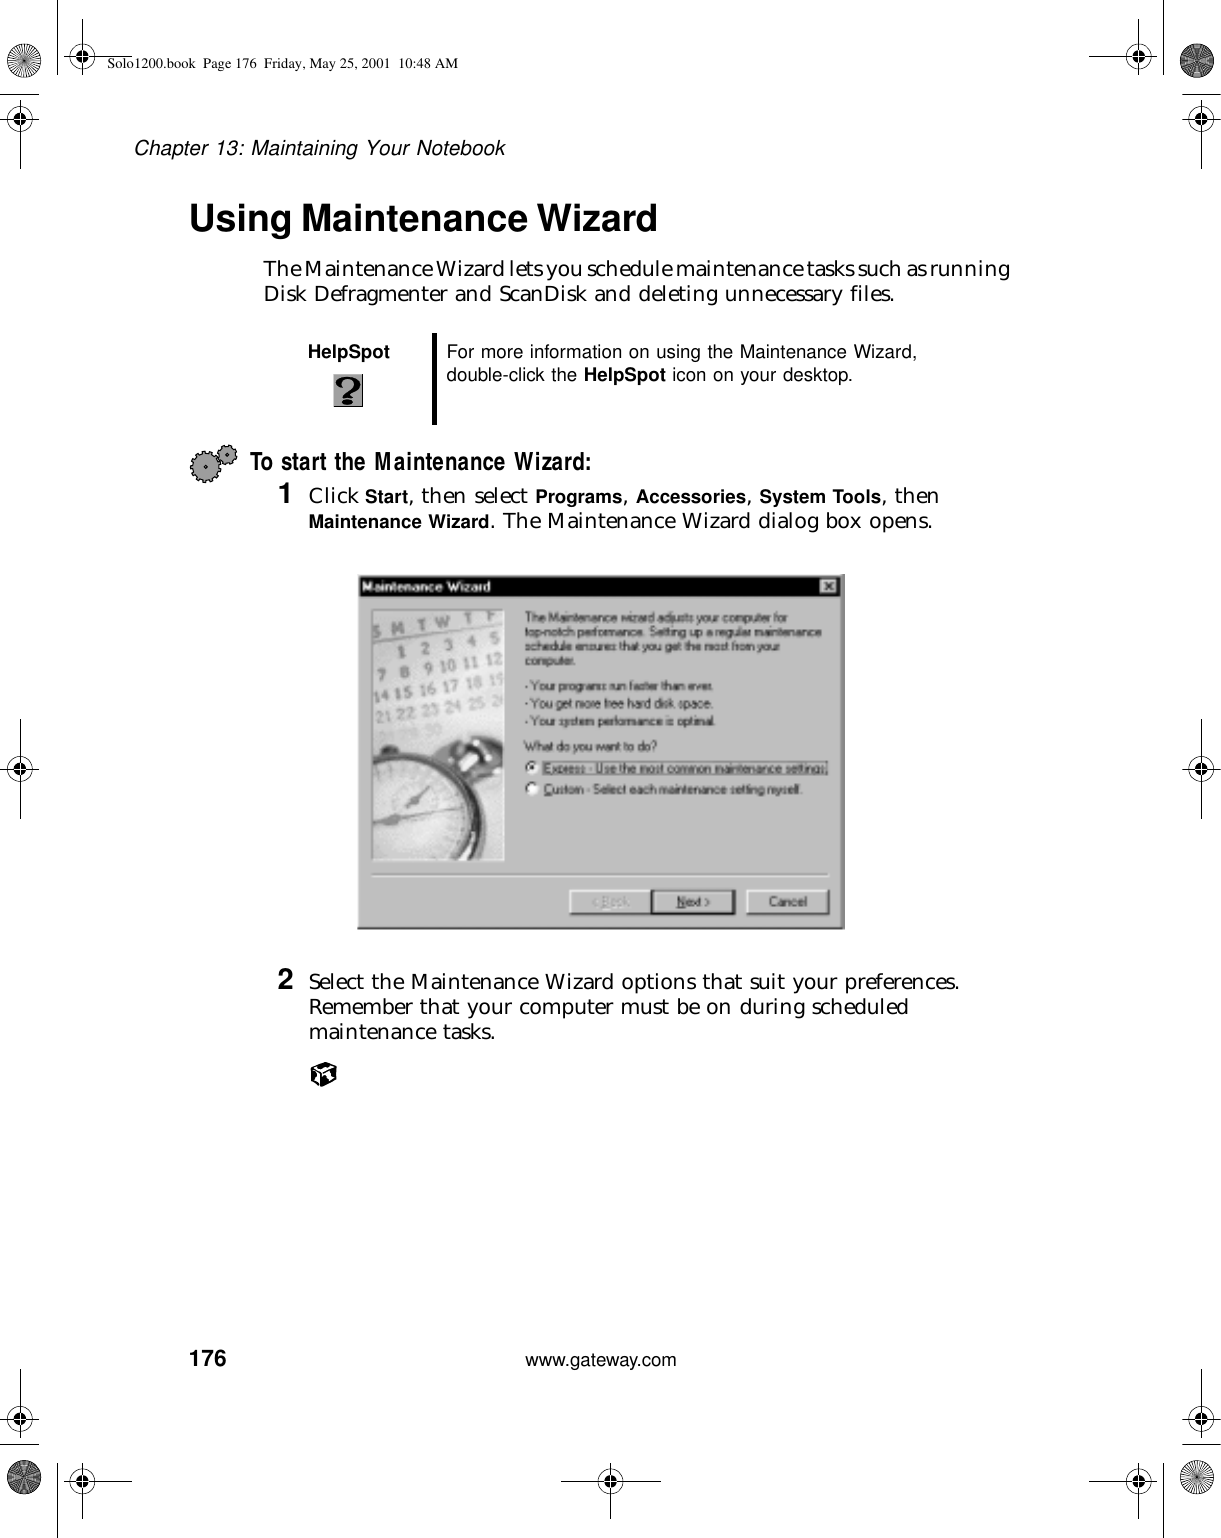 176Chapter 13: Maintaining Your Notebookwww.gateway.comUsing Maintenance WizardThe Maintenance Wizard lets you schedule maintenance tasks such as running Disk Defragmenter and ScanDisk and deleting unnecessary files.To start the Maintenance Wizard:1Click Start, then select Programs, Accessories, System Tools, then Maintenance Wizard. The Maintenance Wizard dialog box opens.2Select the Maintenance Wizard options that suit your preferences. Remember that your computer must be on during scheduled maintenance tasks.HelpSpot For more information on using the Maintenance Wizard, double-click the HelpSpot icon on your desktop.Solo1200.book Page 176 Friday, May 25, 2001 10:48 AM